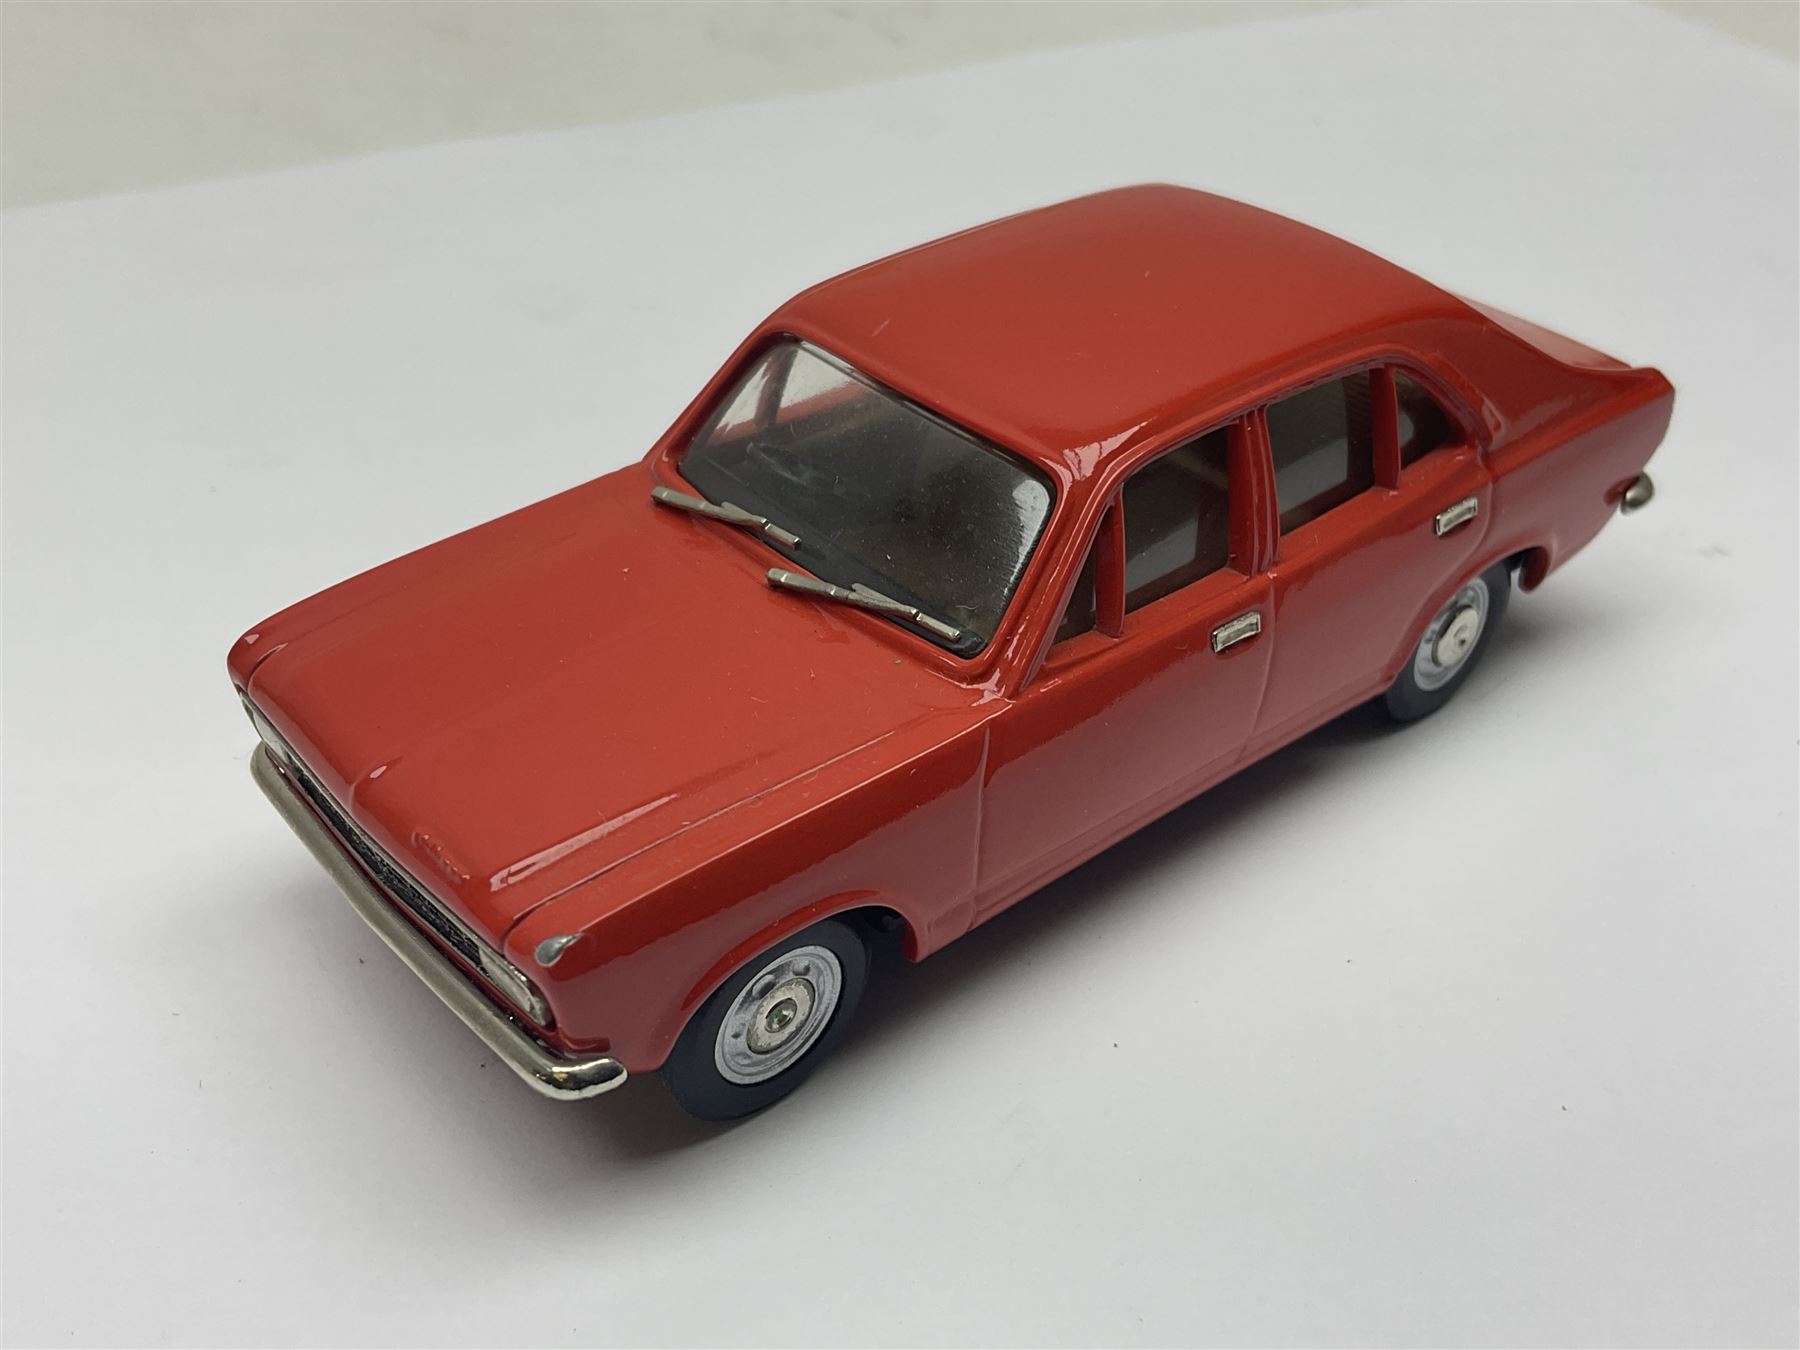 Three Lansdowne Models 1:43 scale models - 1965 Humber Sceptre MkII Four Door Saloon; 1970 Hillman A - Image 2 of 10